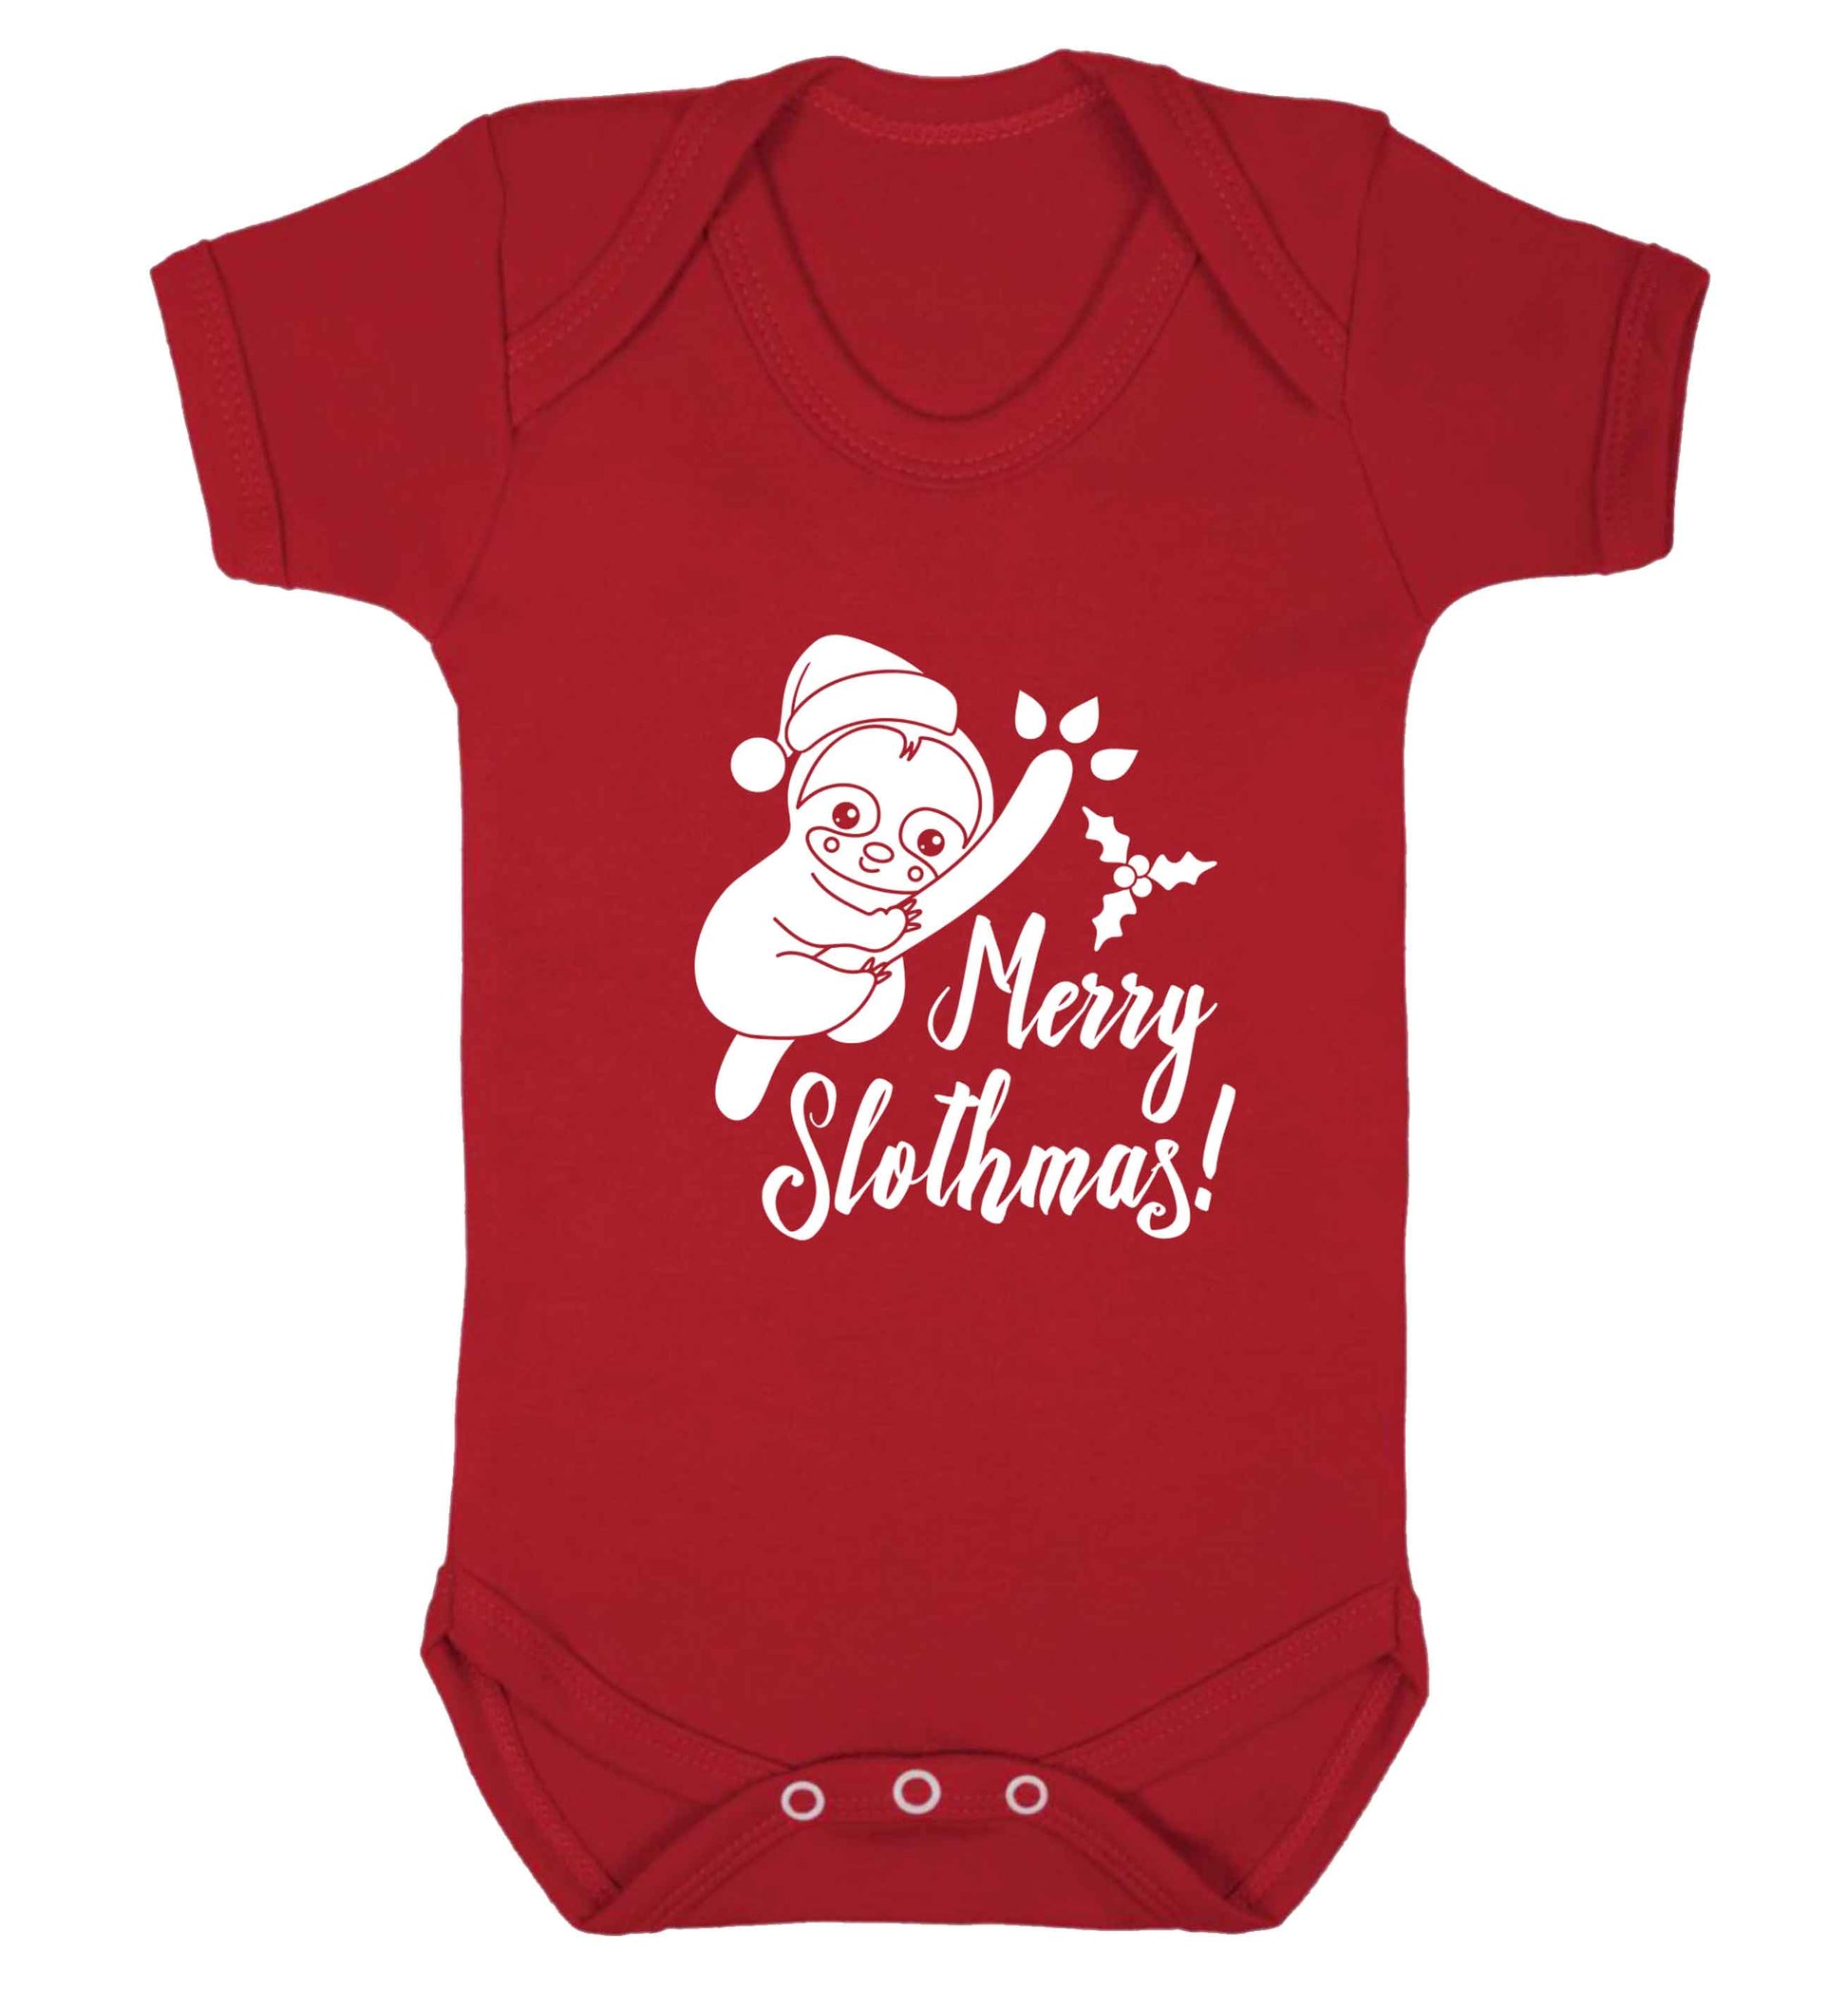 Merry Slothmas baby vest red 18-24 months